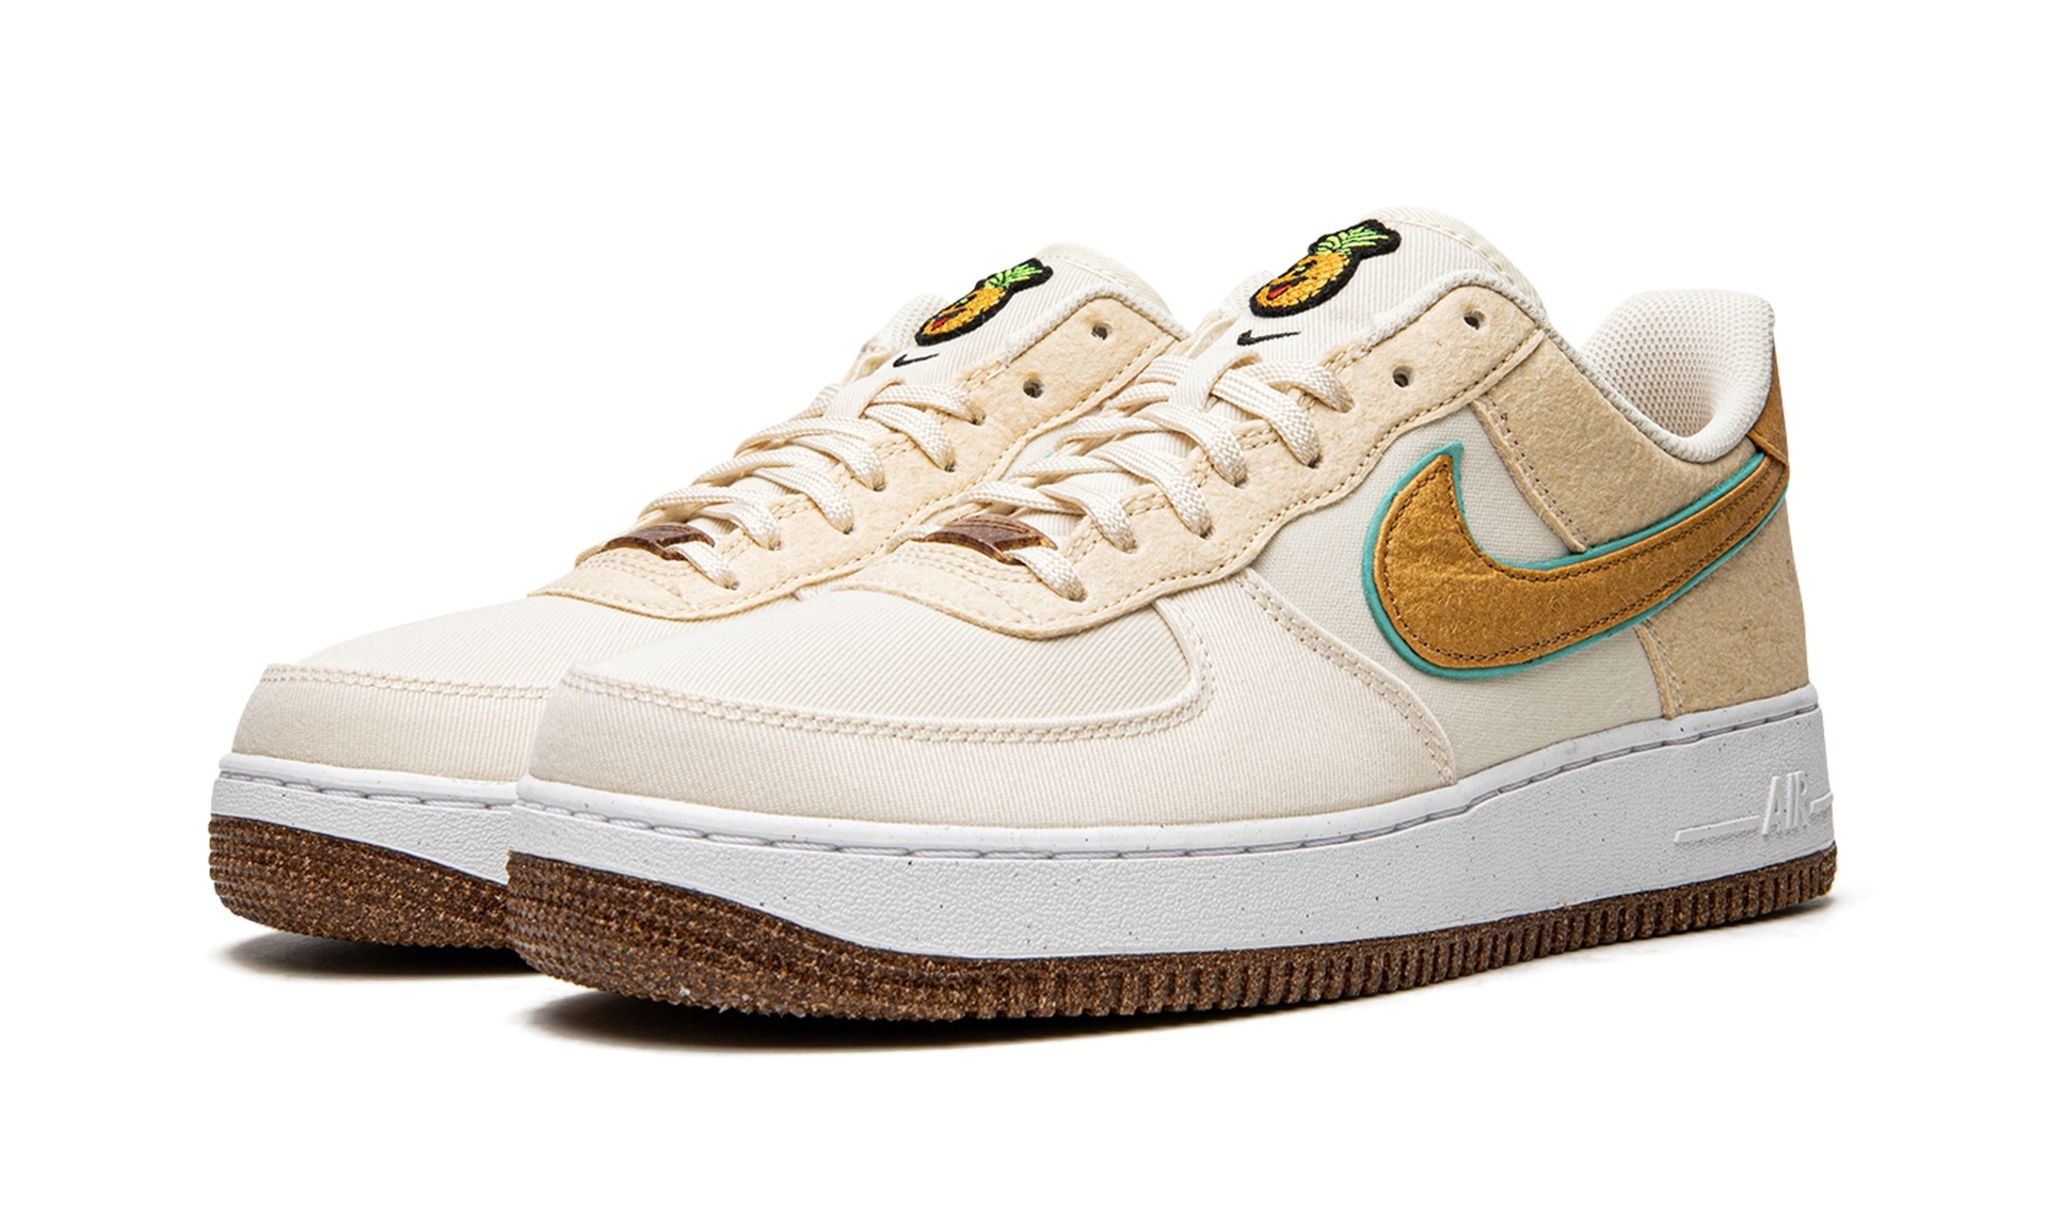 Air Force 1 '07 PRM "Happy Pineapple" - 2